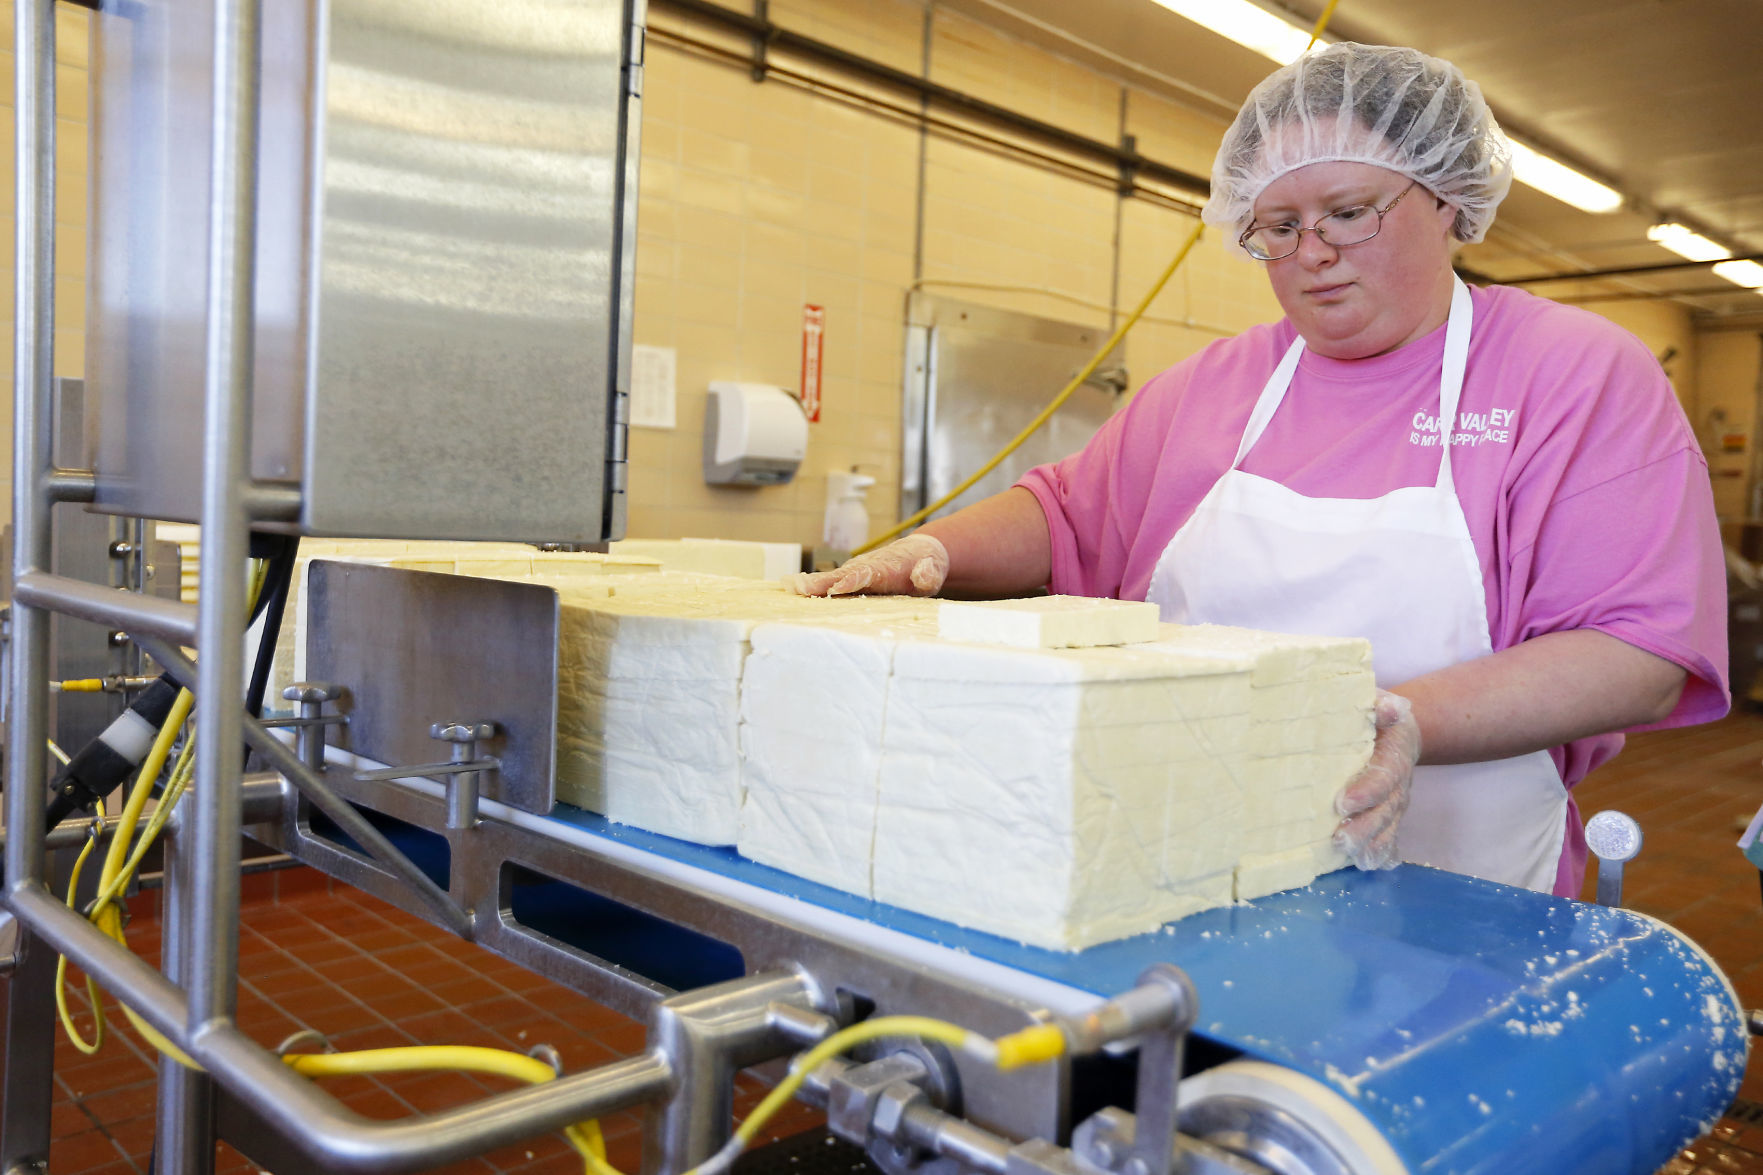 Renee Collins, of Mount Hope, Wis., stacks cheese to be put on trays at Carr Valley Cheese Company in Fennimore, Wis., on Thursday, Mar. 22, 2018.    PHOTO CREDIT: EILEEN MESLAR